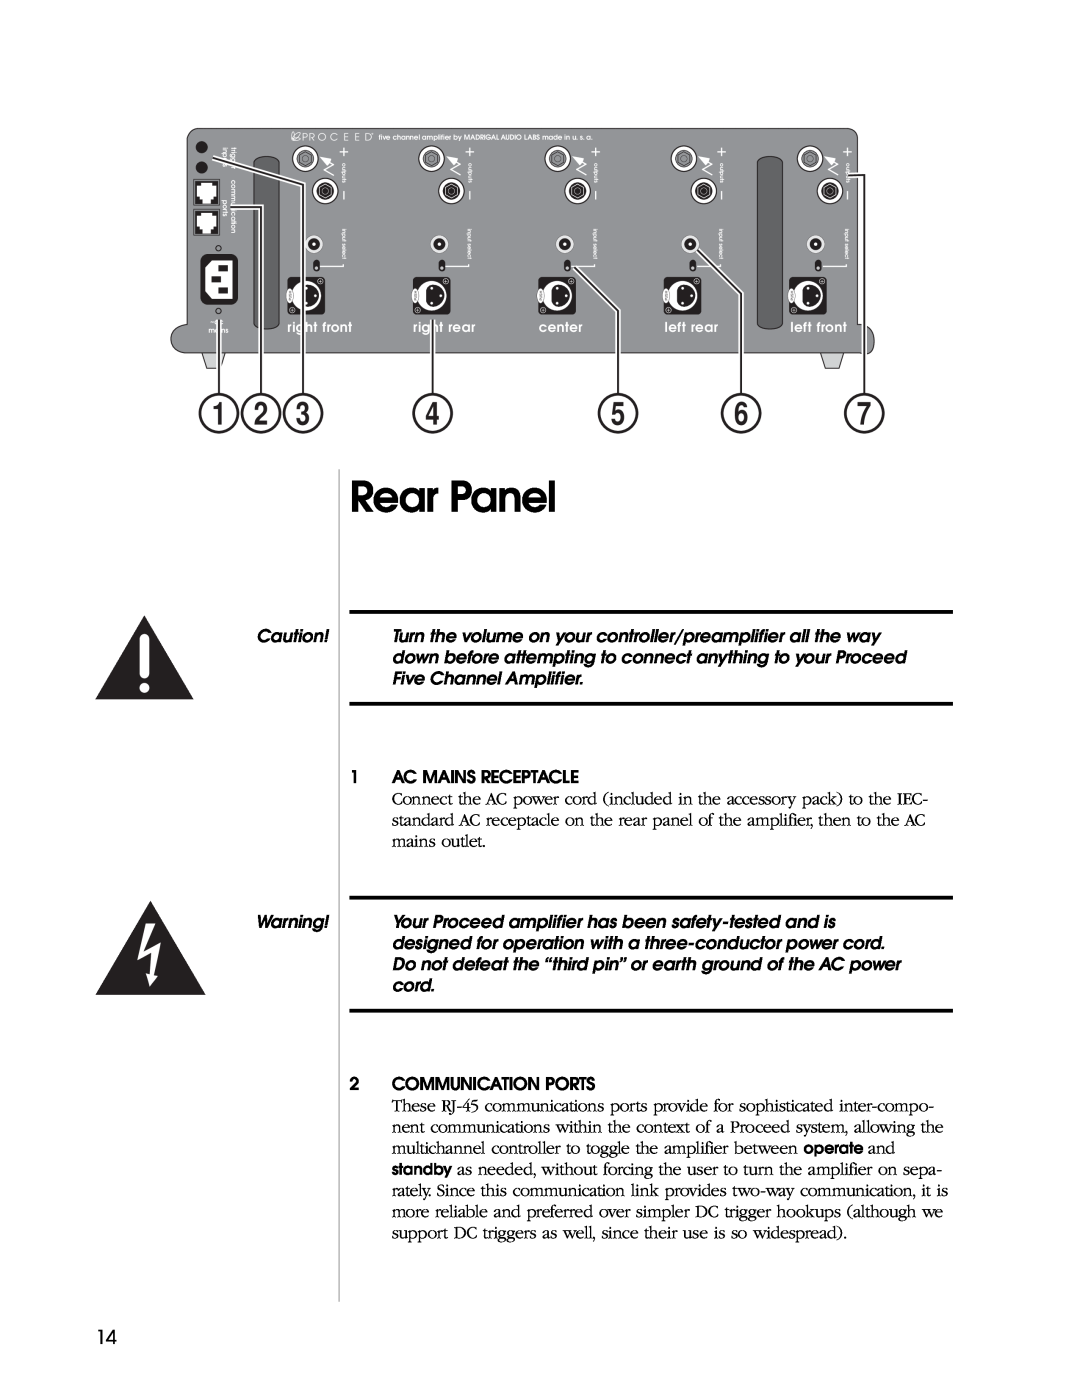 Madrigal Imaging Five Channel Amplifier manual Rear Panel, 1AC MAINS RECEPTACLE, 2COMMUNICATION PORTS 